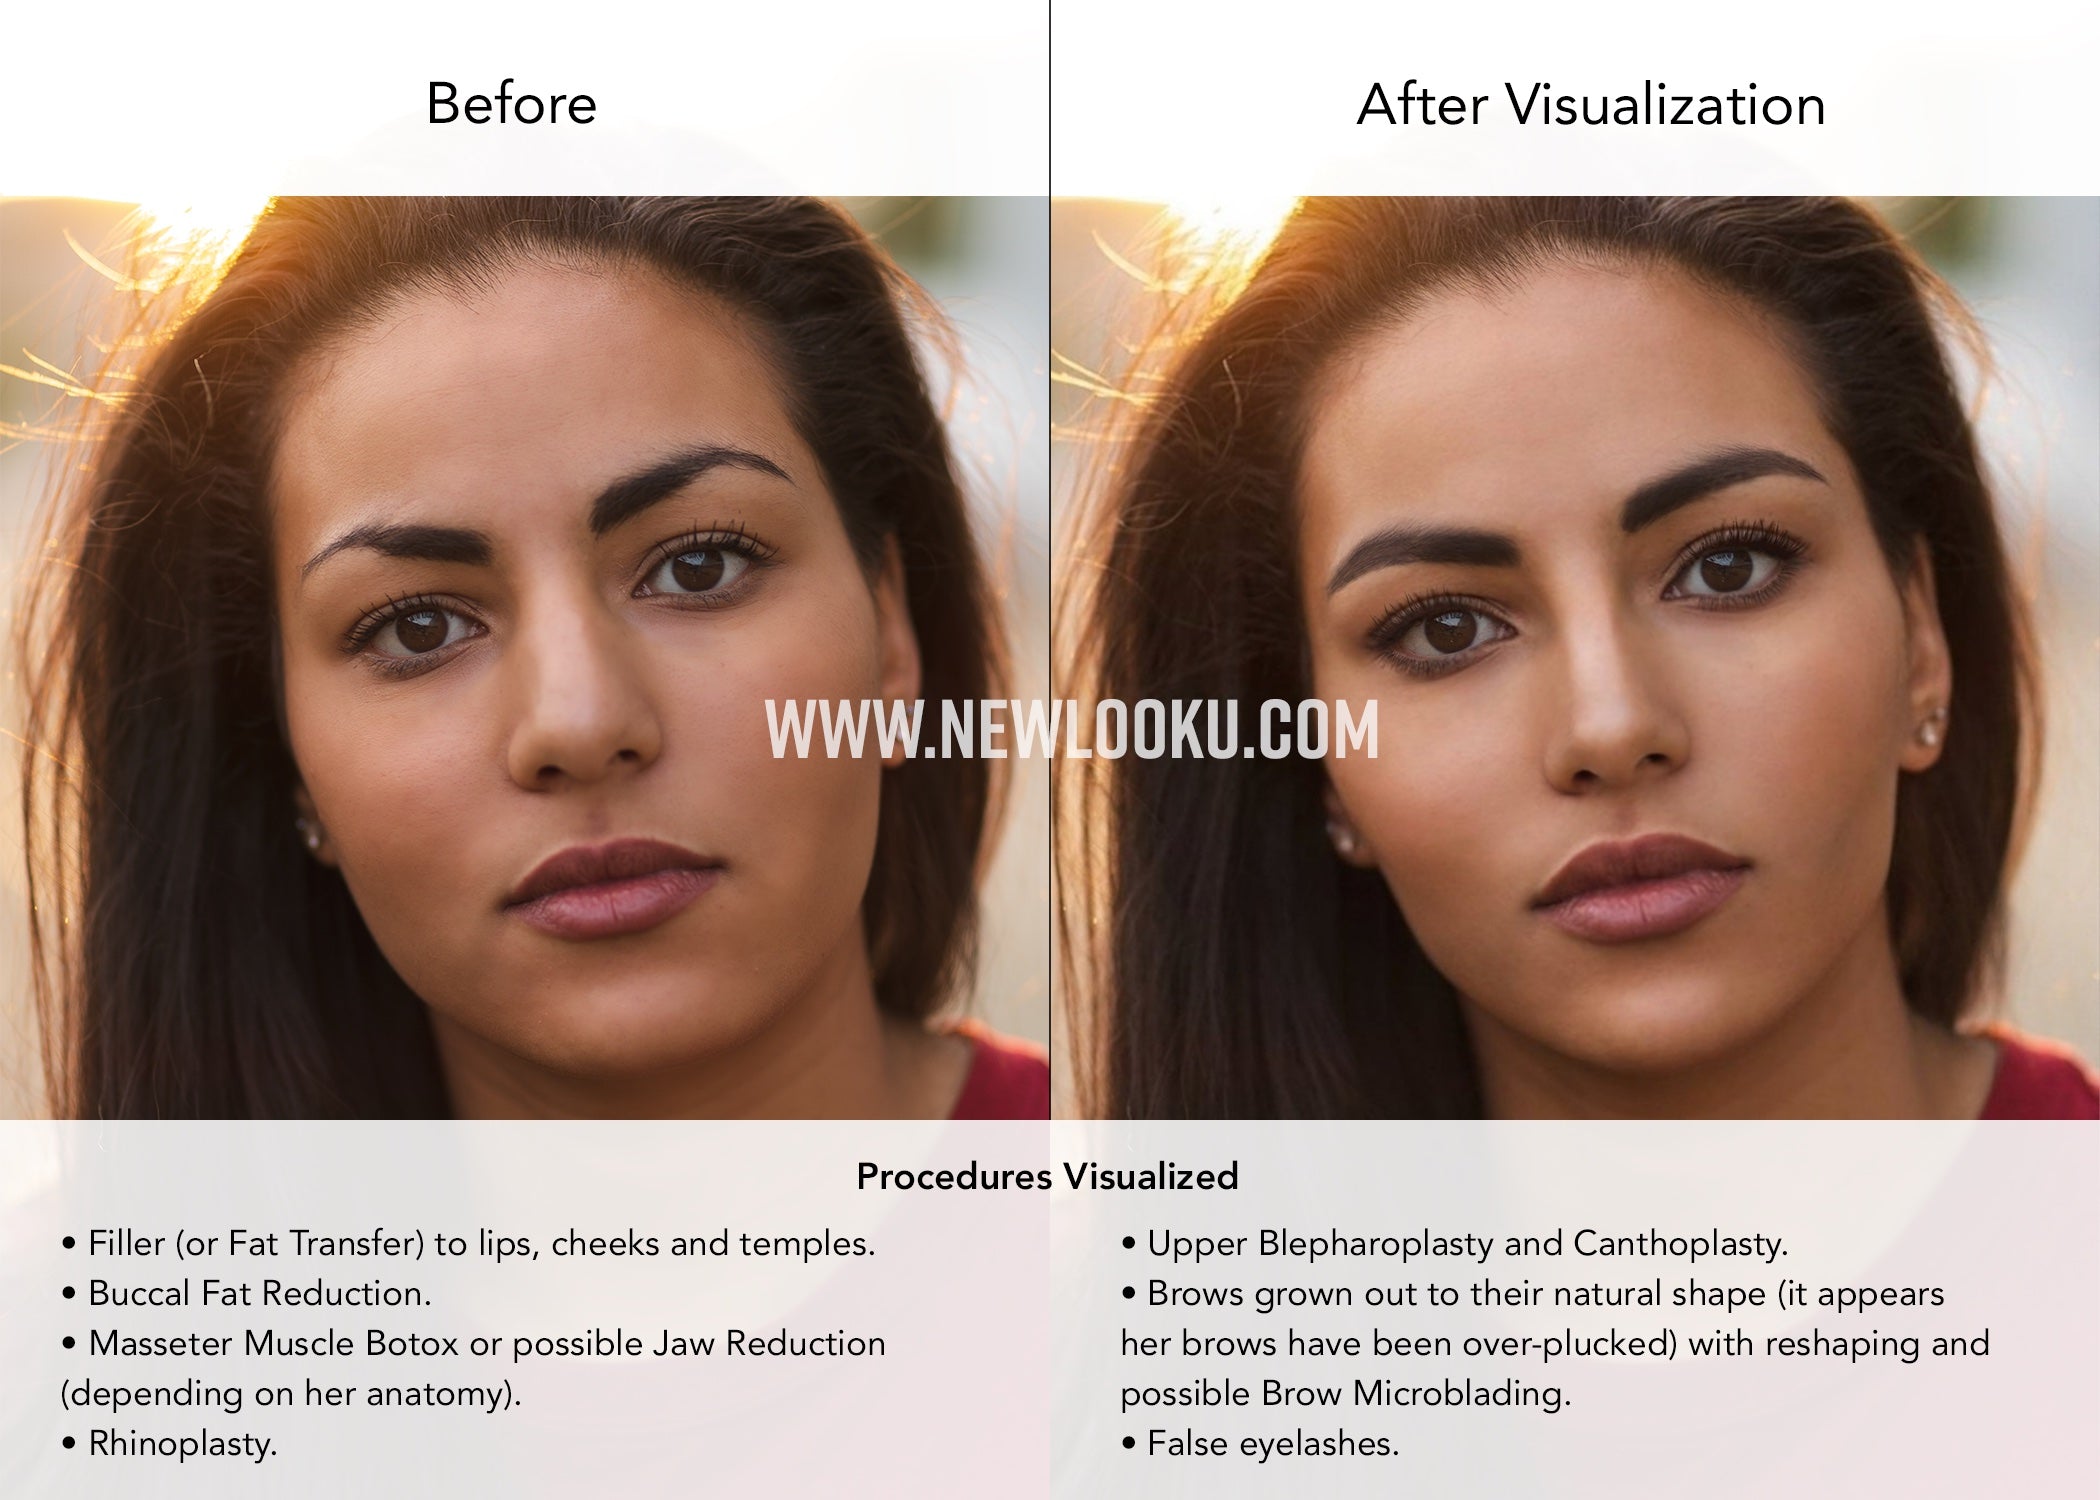 Female Plastic Surgery Visualization Before and After: Rhinoplasty, Lip Filler, Brow Reshaping, Buccal Fat Reduction, Jaw Filler, Canthoplasty and Upper Blepharoplasty. Brows reshaped with possible Brow Microblading.